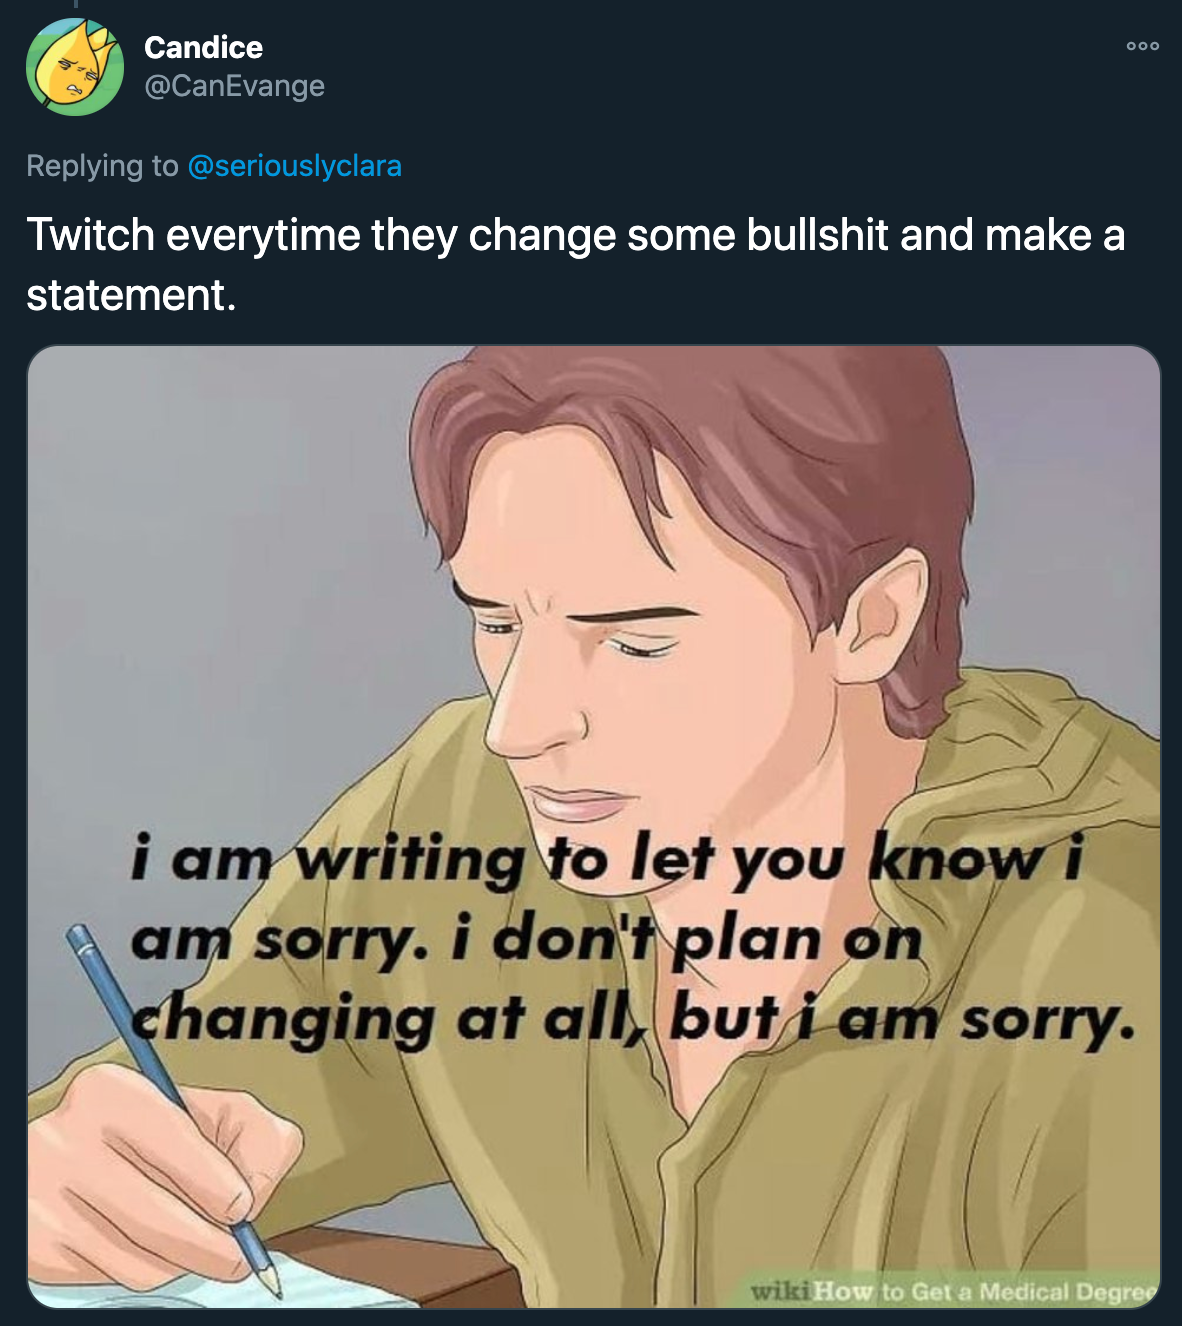 twitter reacts to twitch banning simp and incel - Twitch every time they change some bullshit and make a statement i am writing to let you know i am sorry. i don't plan on changing at all, but i am sorry.